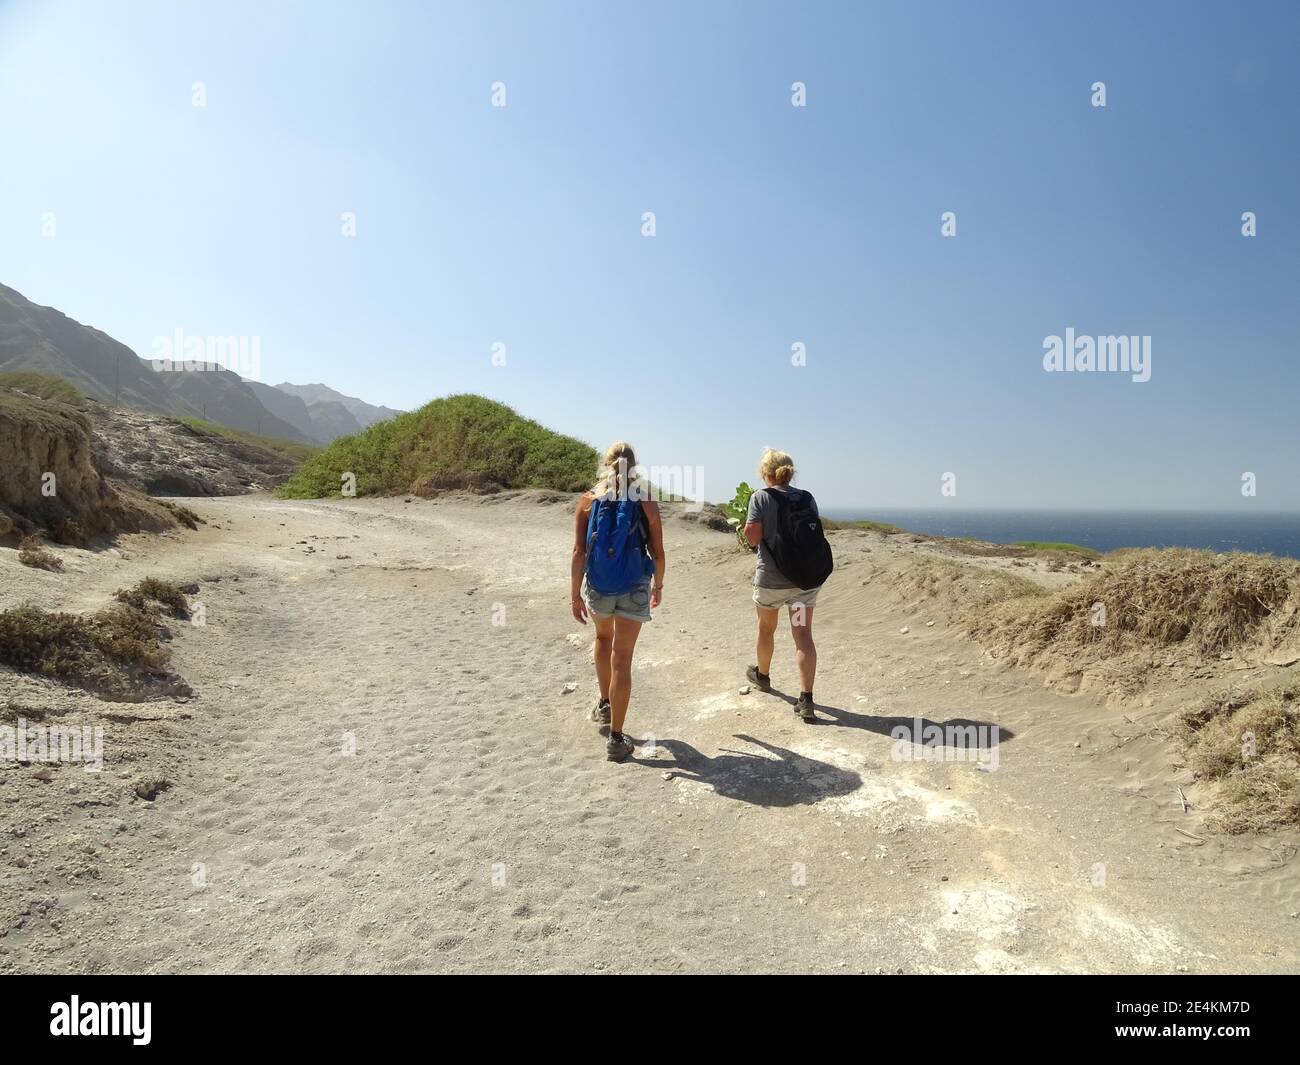 Two people hiking, walking tour, Cape Verde, Santo Antao island, outdoor, solo. Stock Photo